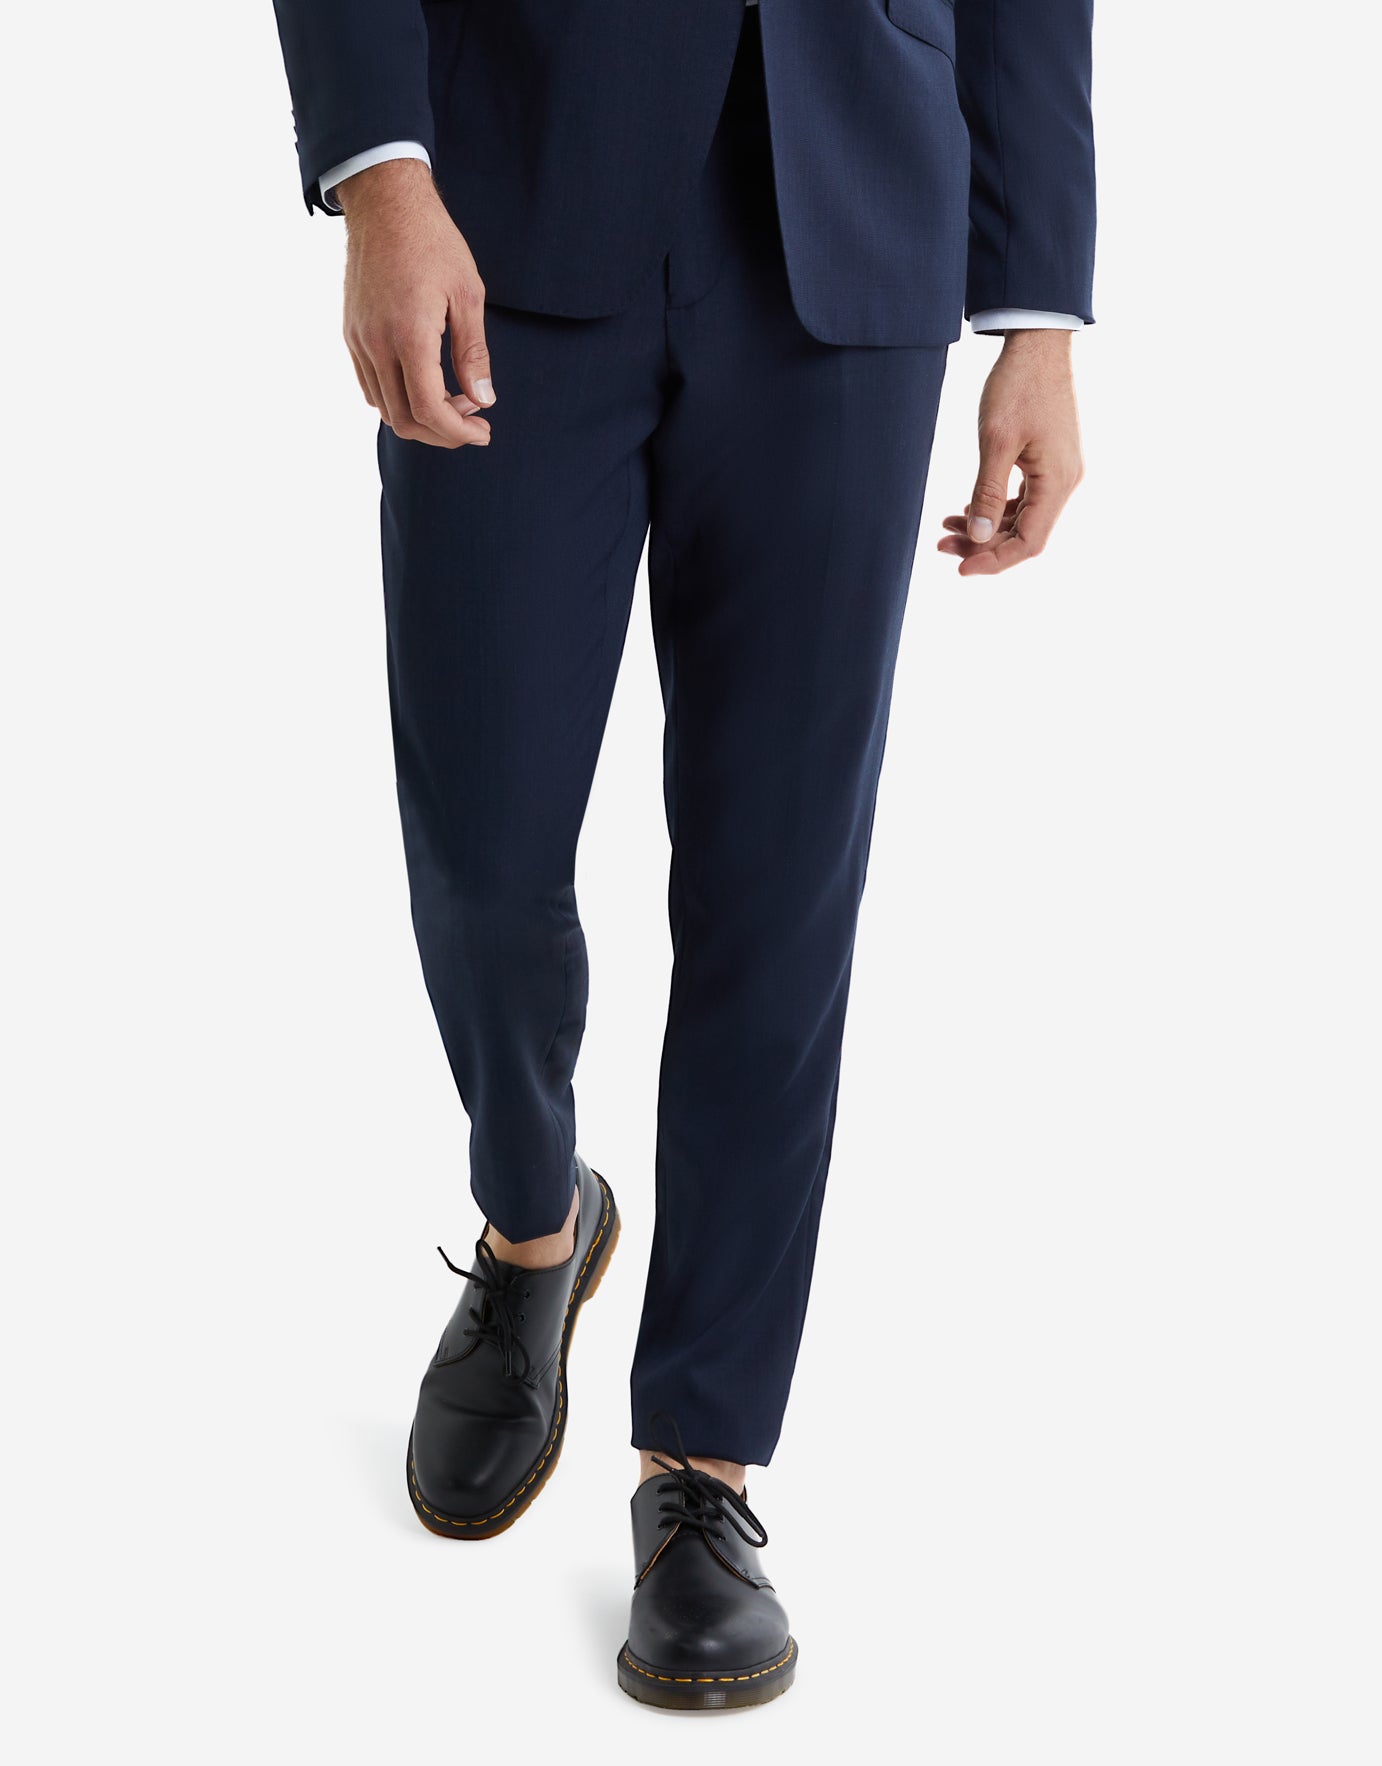 Top more than 73 navy blue suit trousers - in.duhocakina